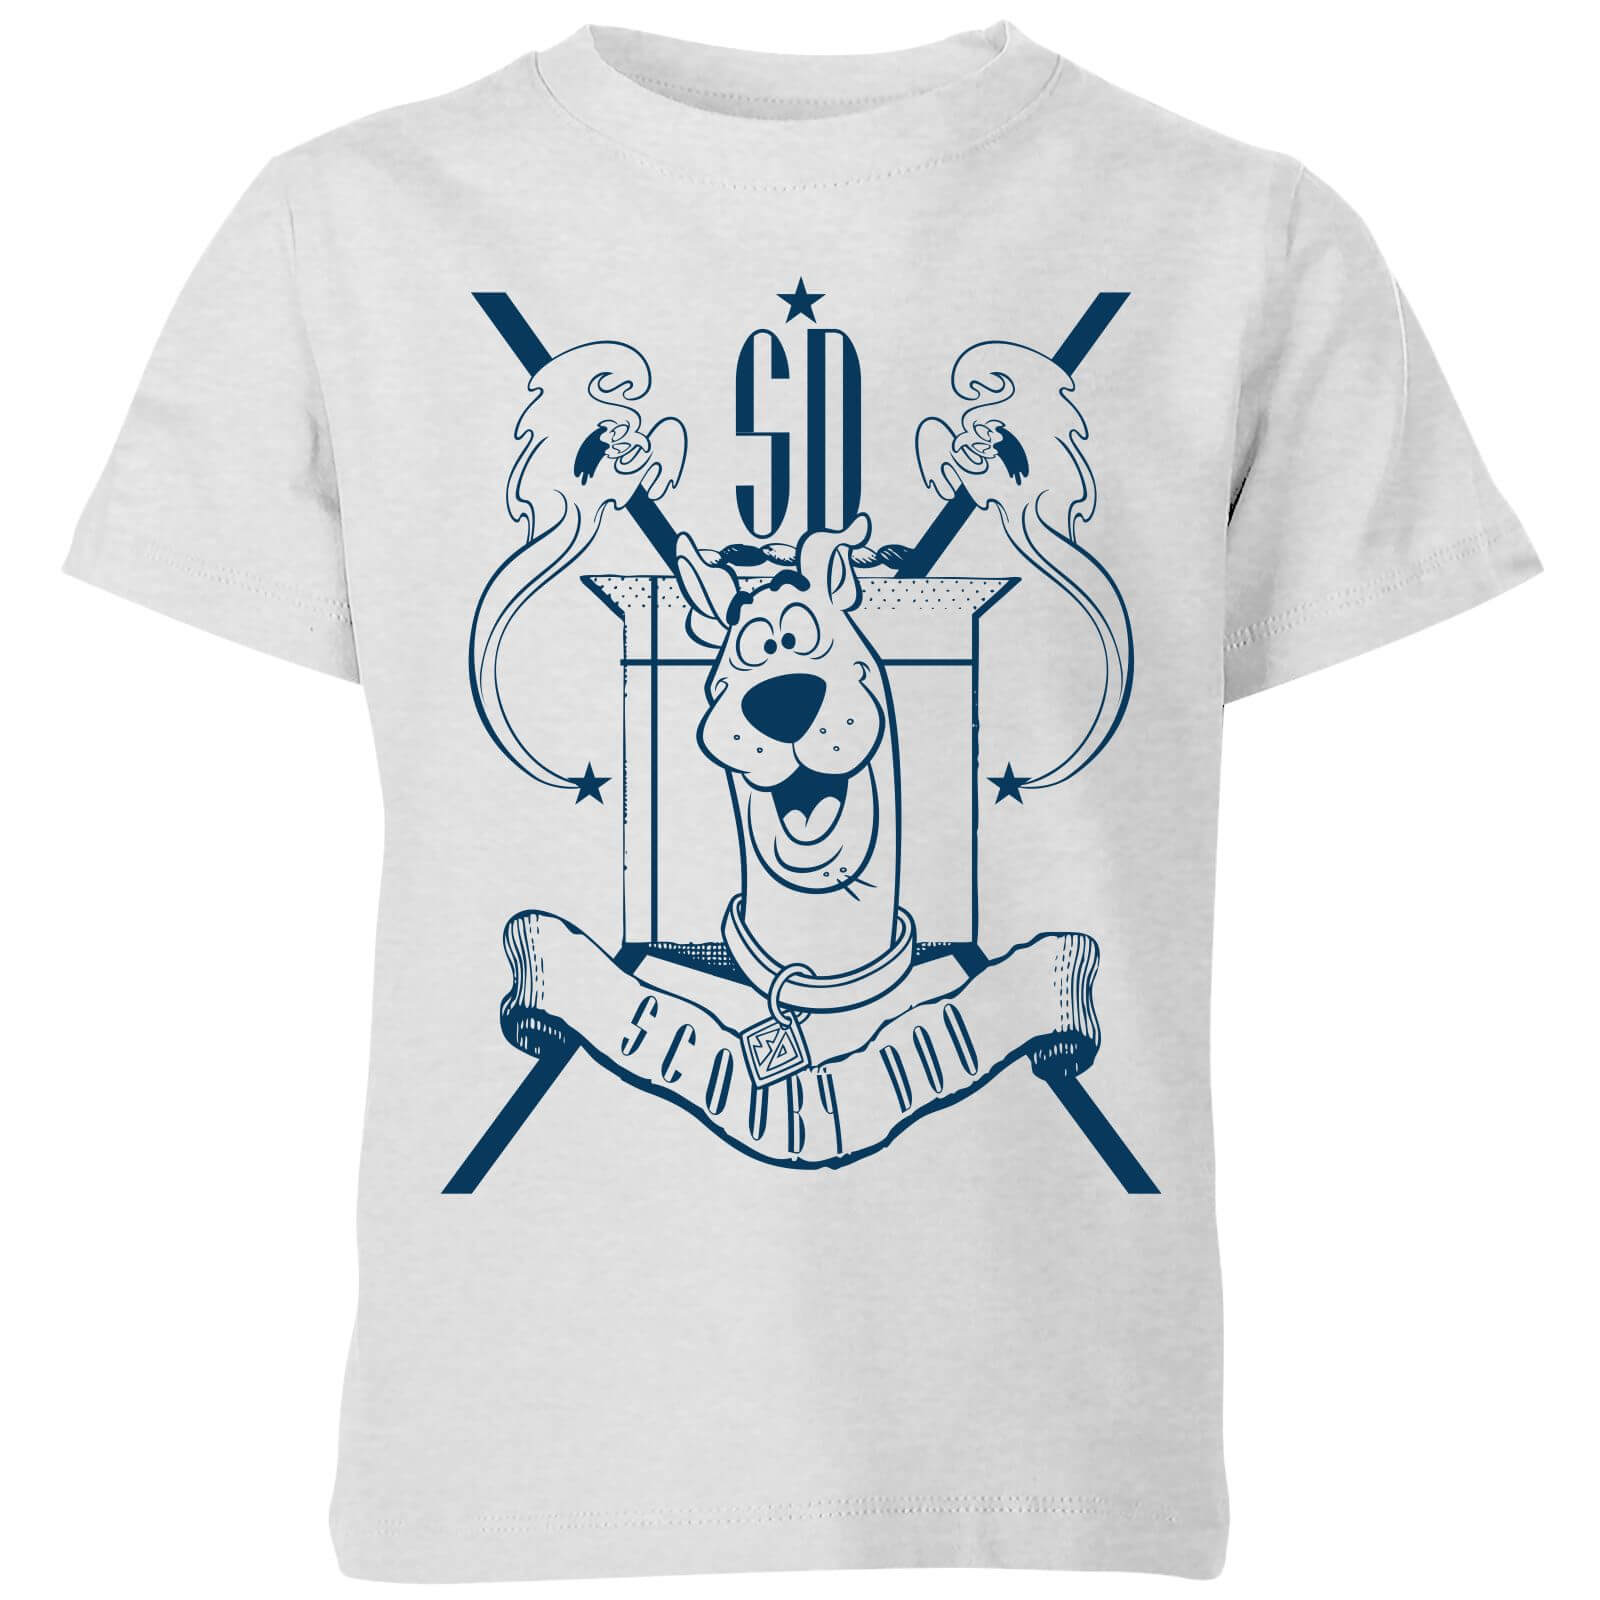 Scooby Doo Coat Of Arms Kids' T-Shirt - Grey - 9-10 Jahre